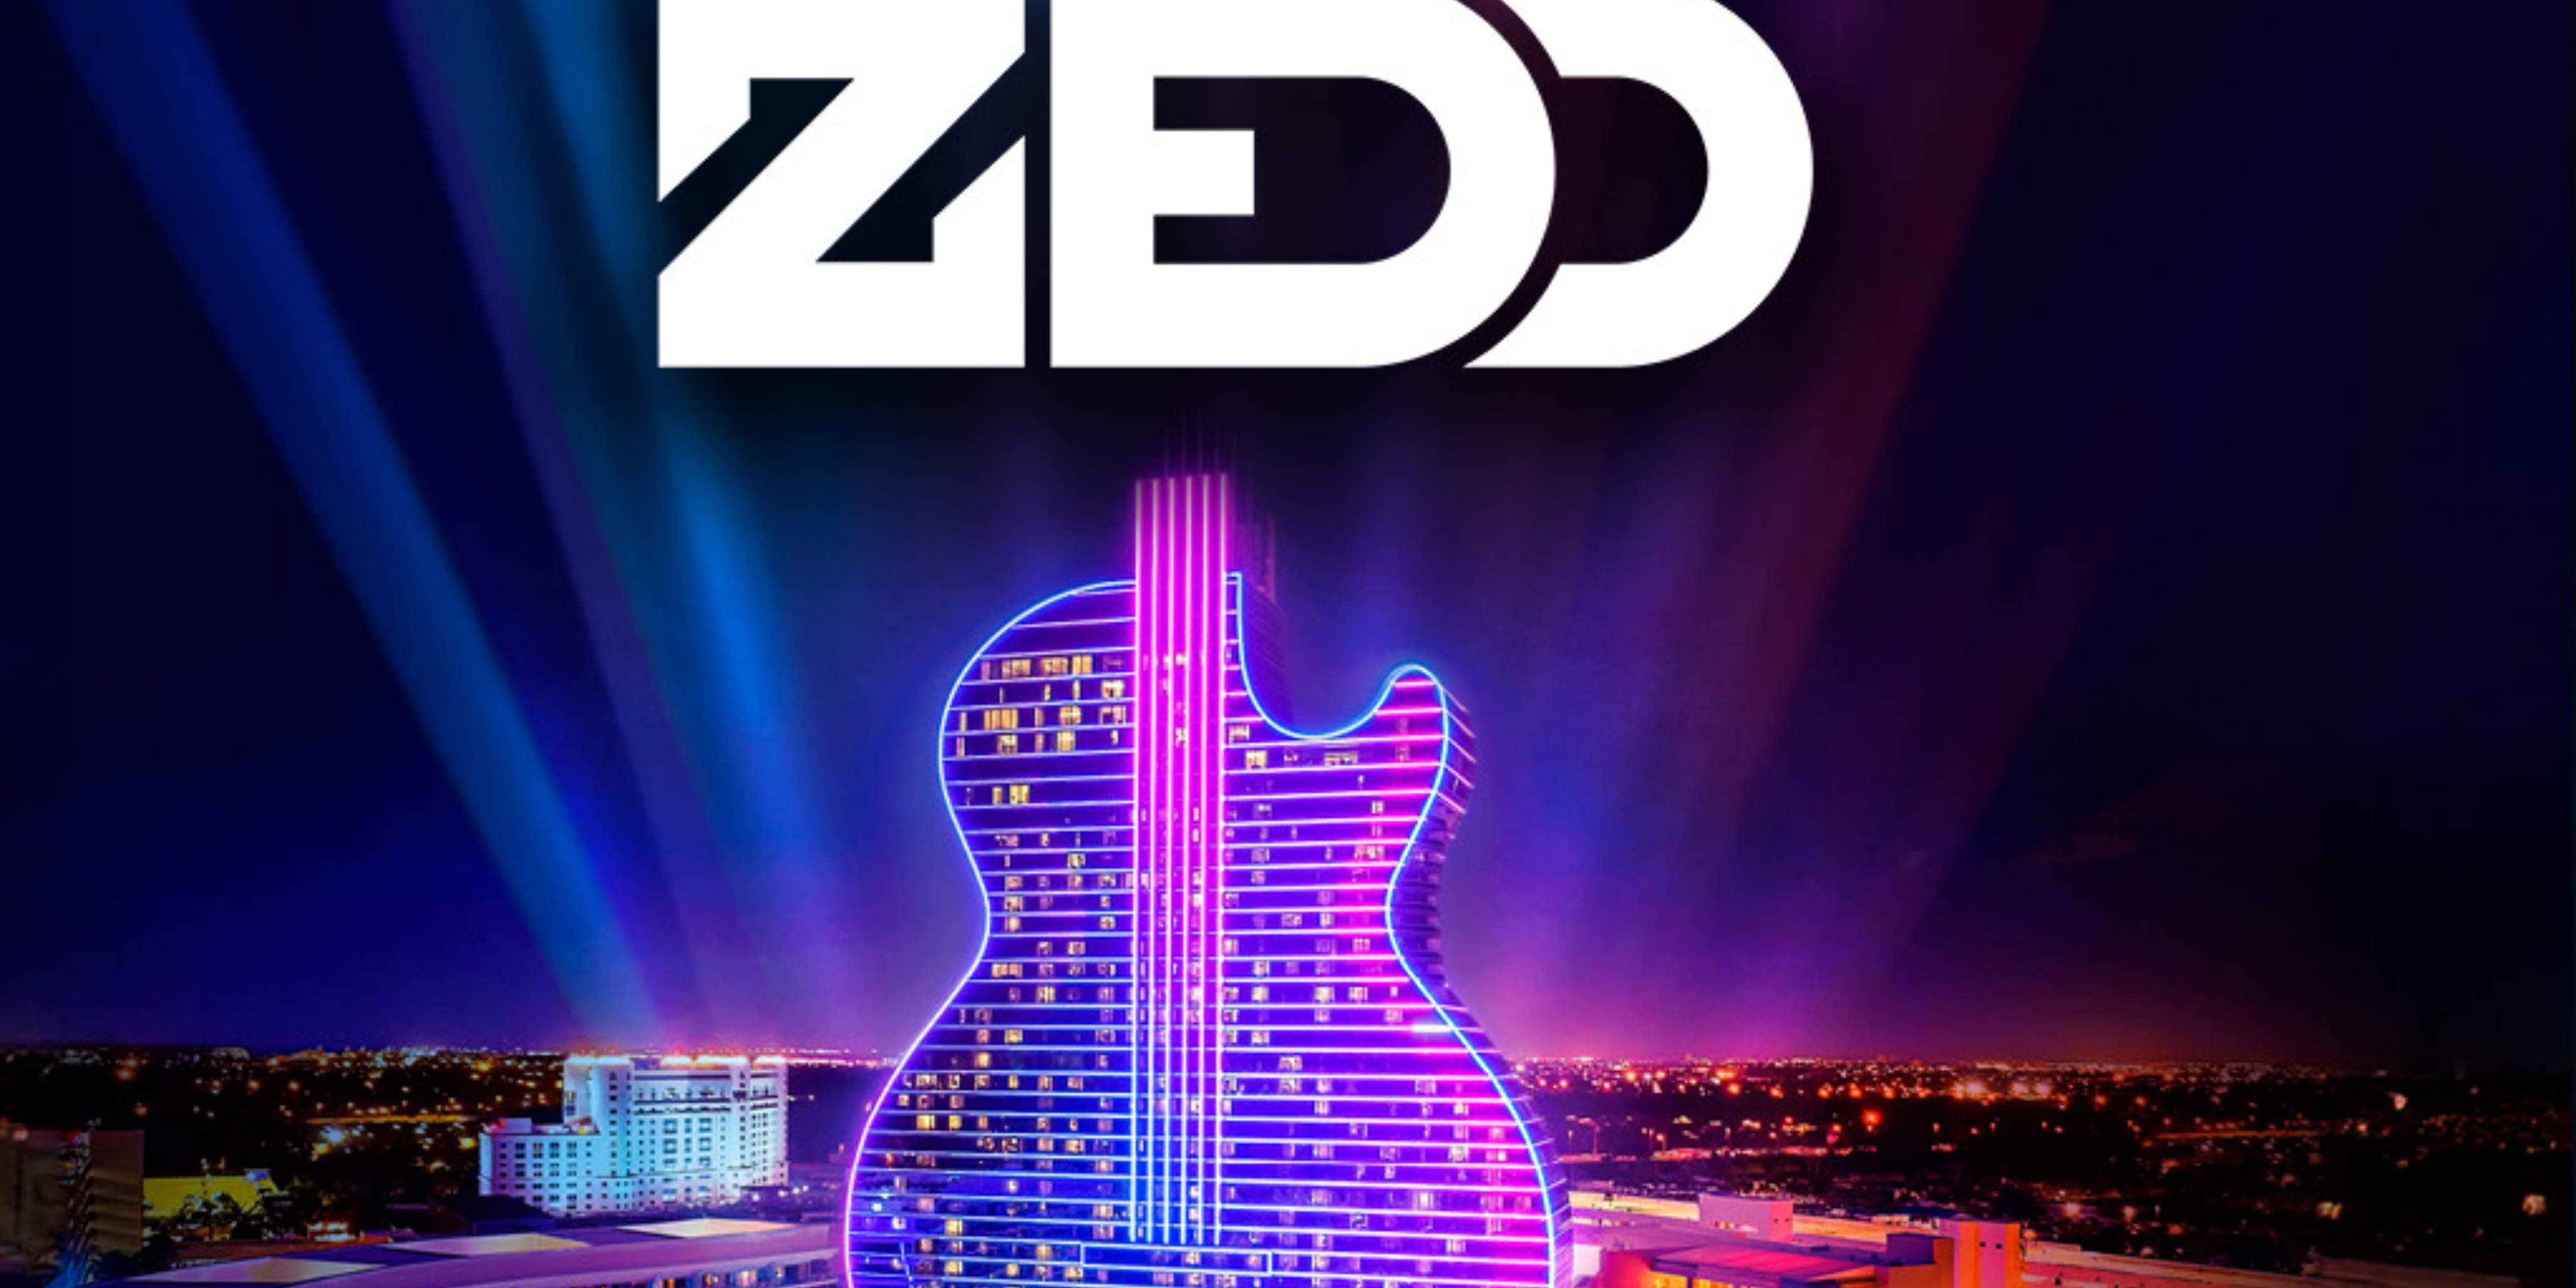 Zedd Lights Up The Guitar Hotel Pool: Epic Collaboration and Immersive Sensory Experience